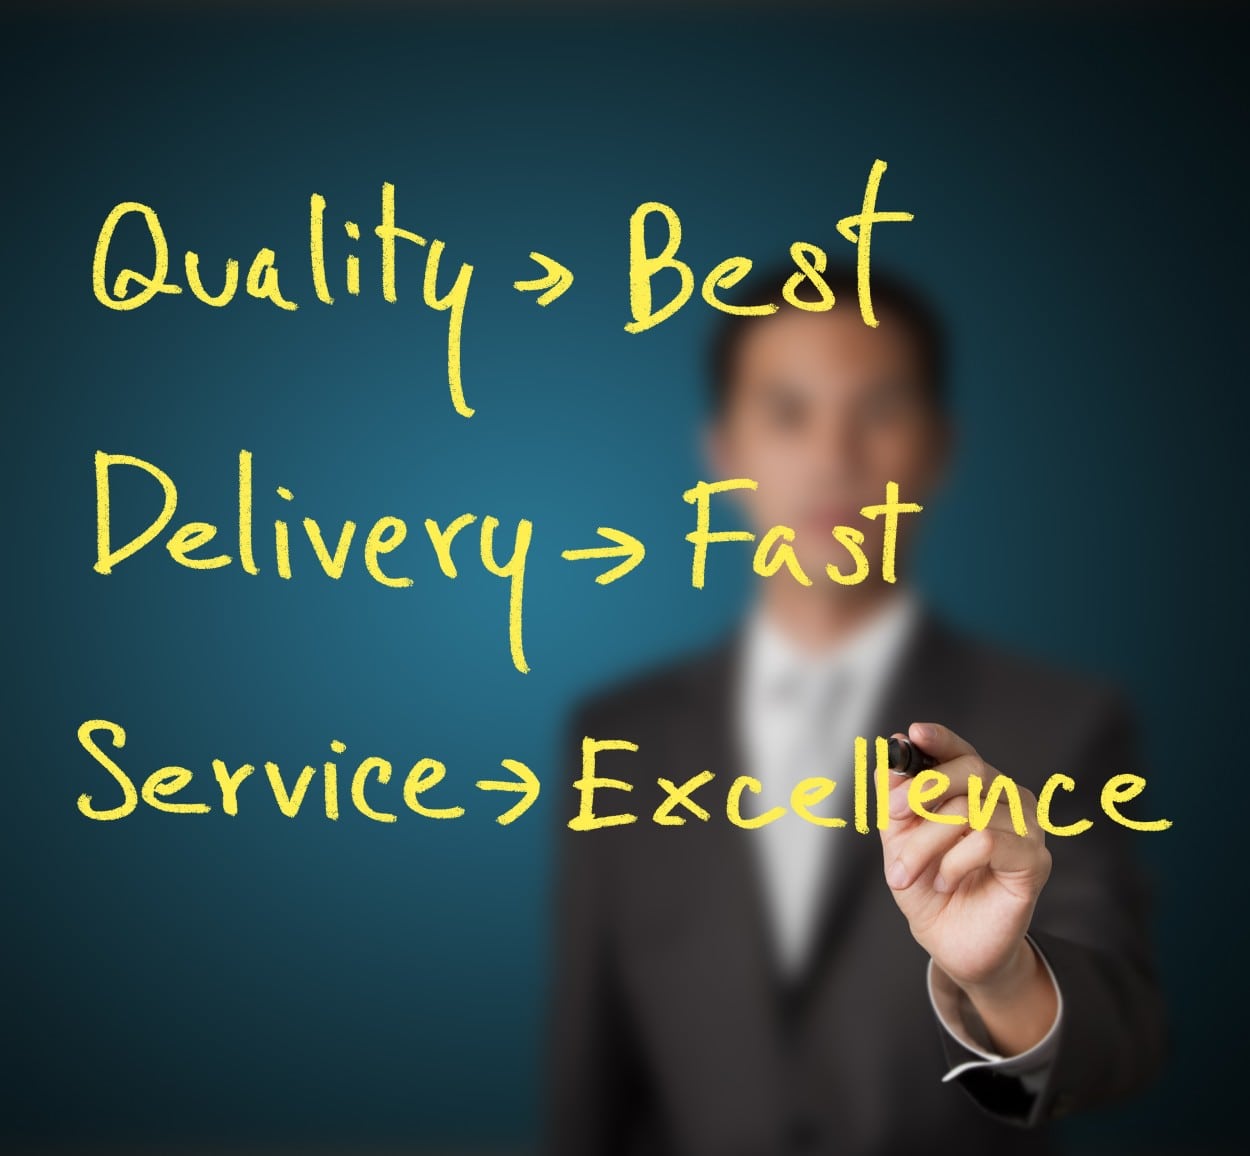 Datapac provides a fast delivery service to Google EMEA